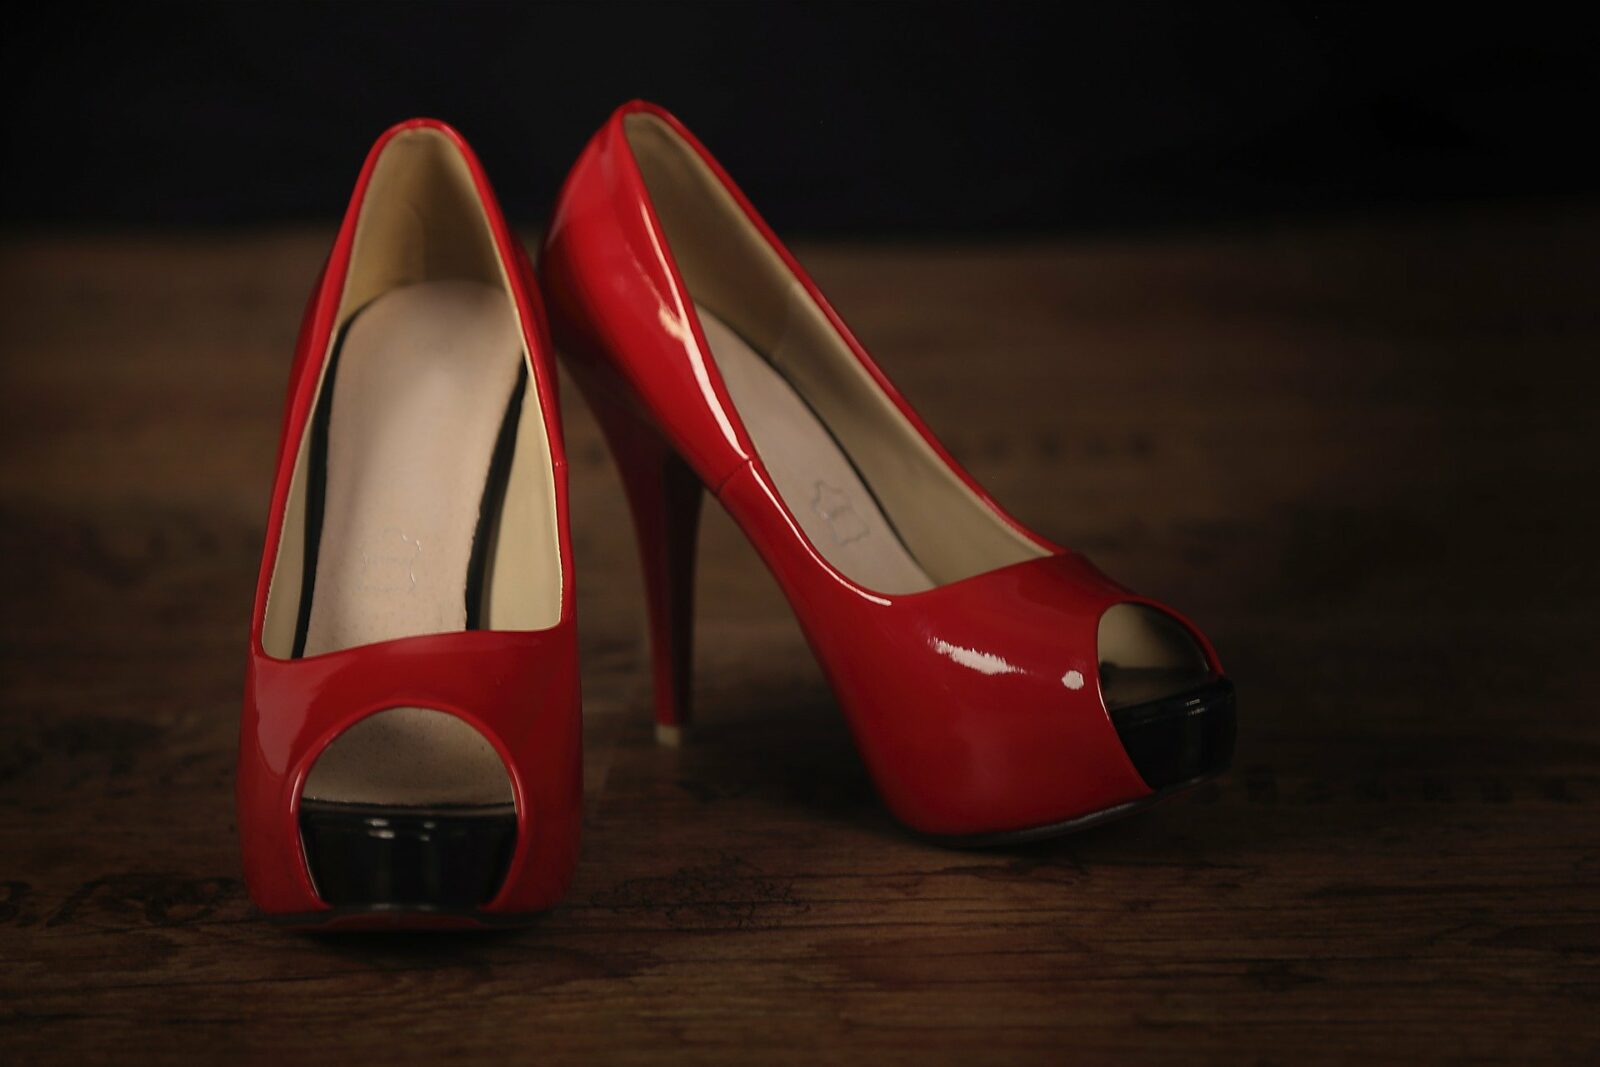 The Red Shoes (Story by Risa Peris) | The 200 Word Short Story